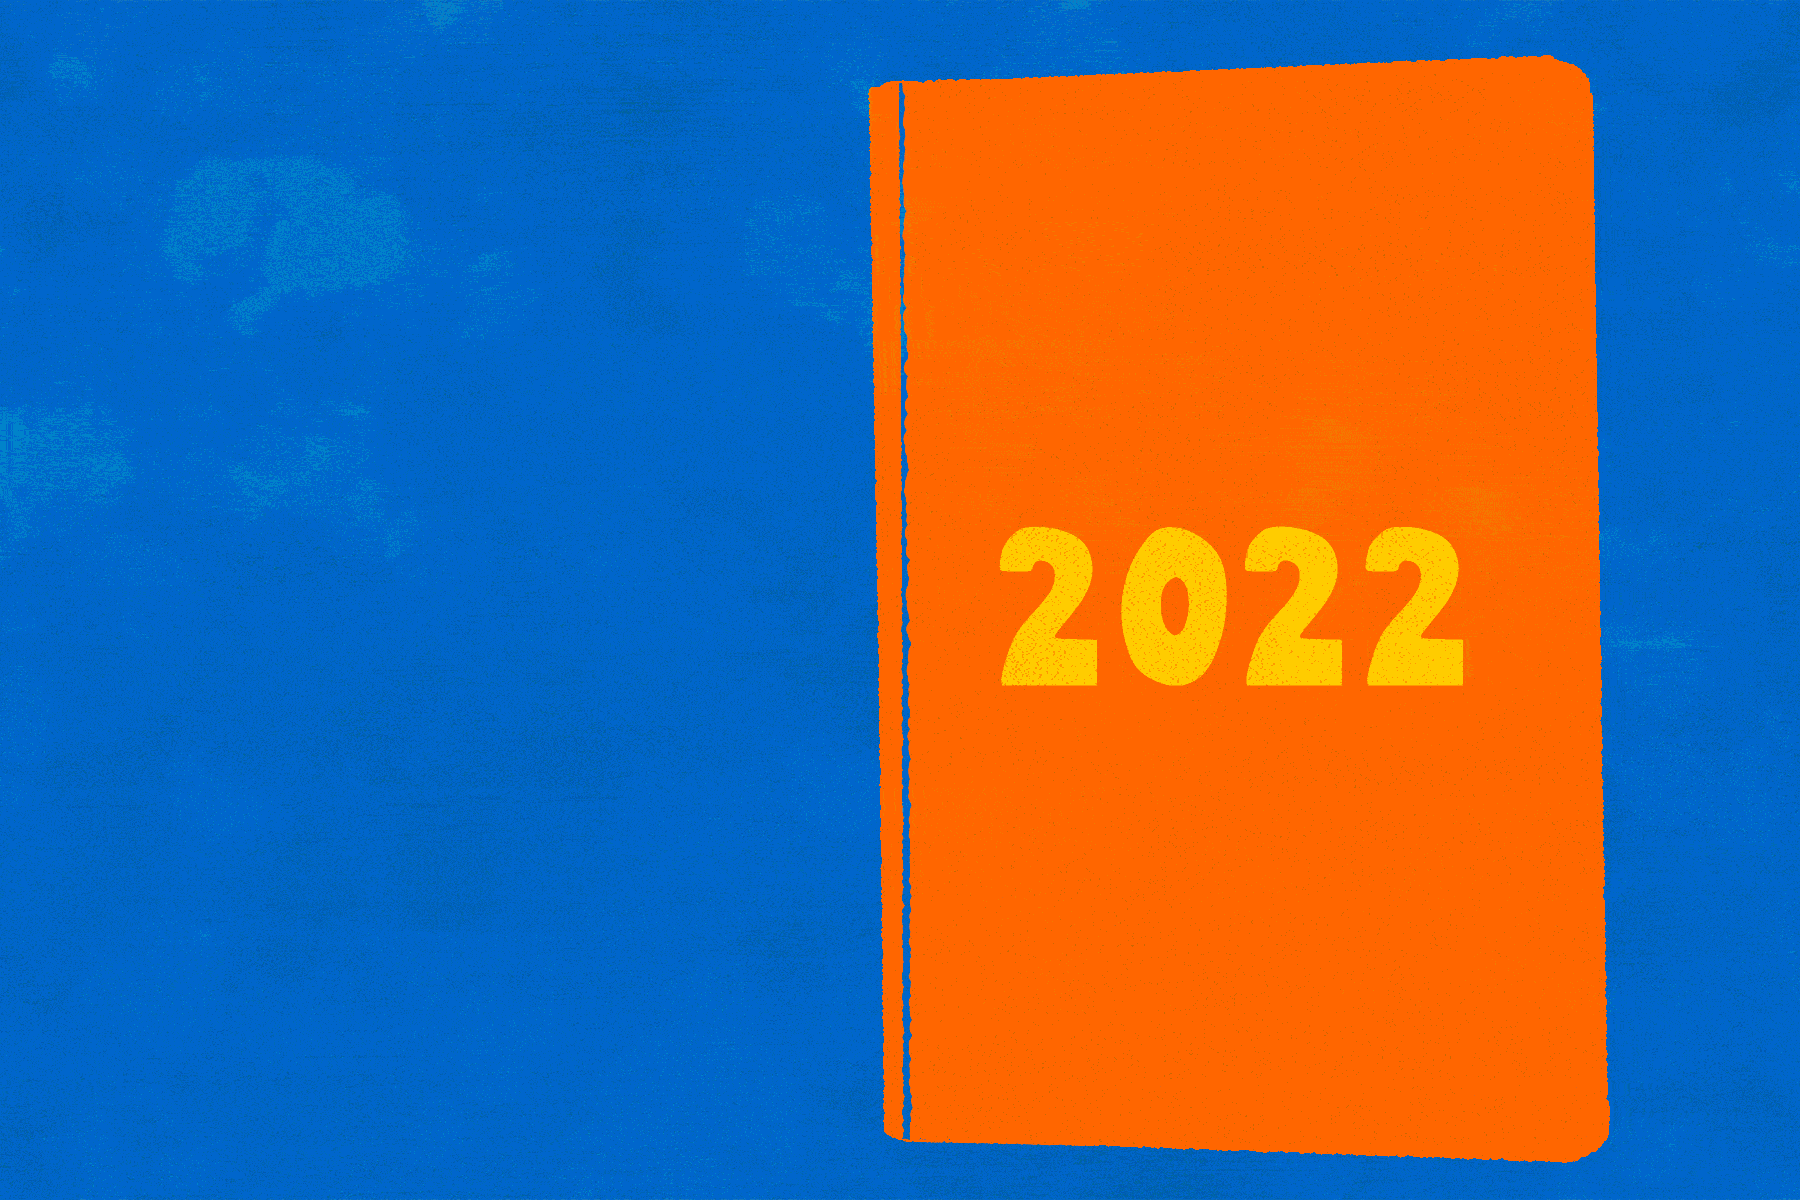 A moving gif of an orange and yellow book on a blue background. The book is called '2022' and opens to show illustrations of a ball of wool, a burning planet, and a person doing yoga